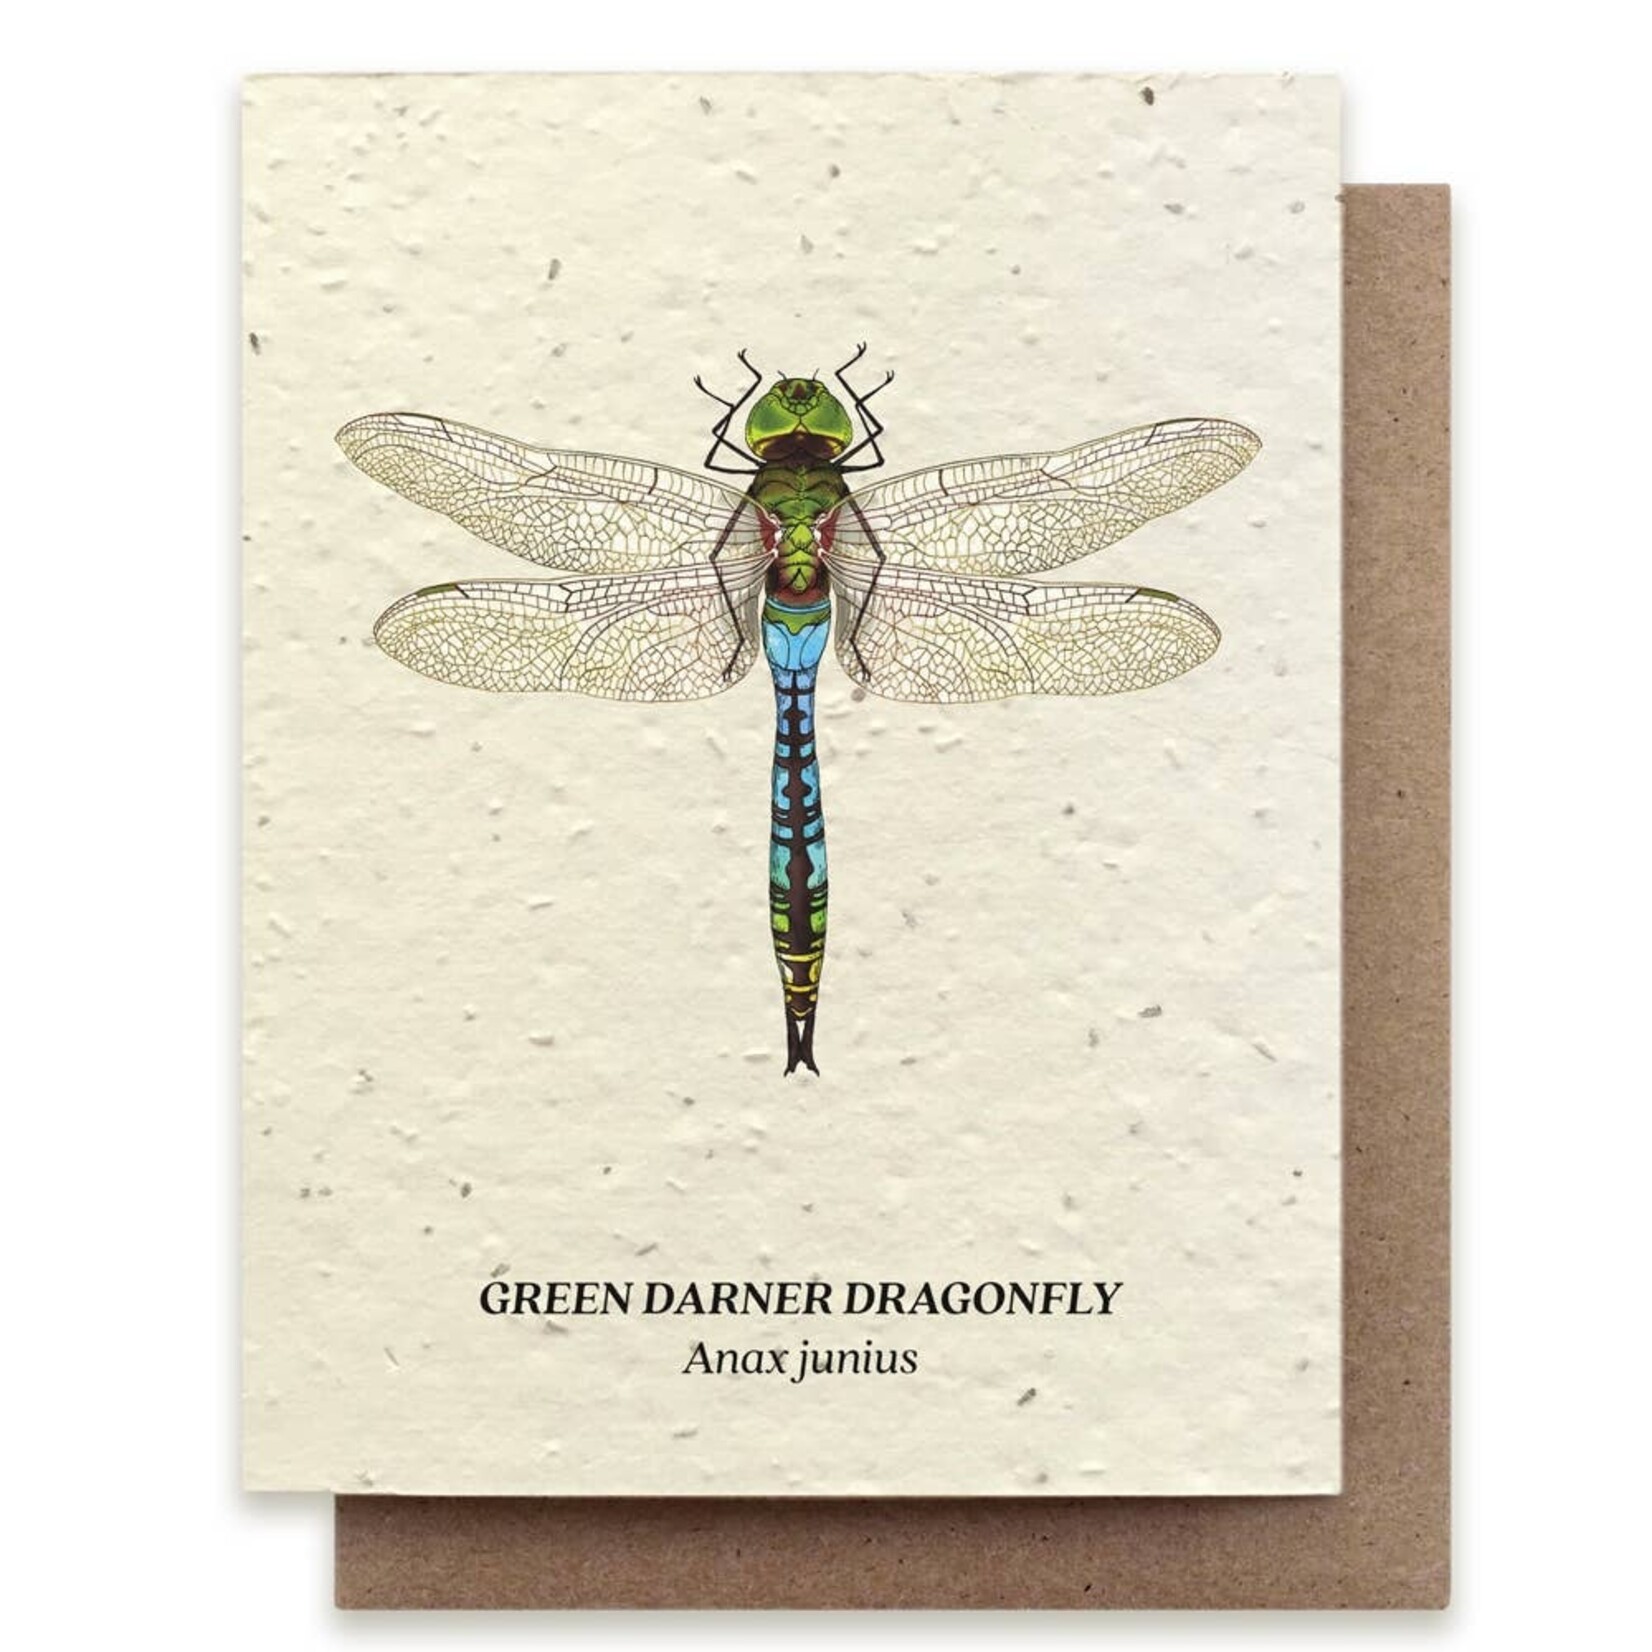 Small Victories Small Victories Green Darner Dragonfly Plantable Wildflower Seed Card